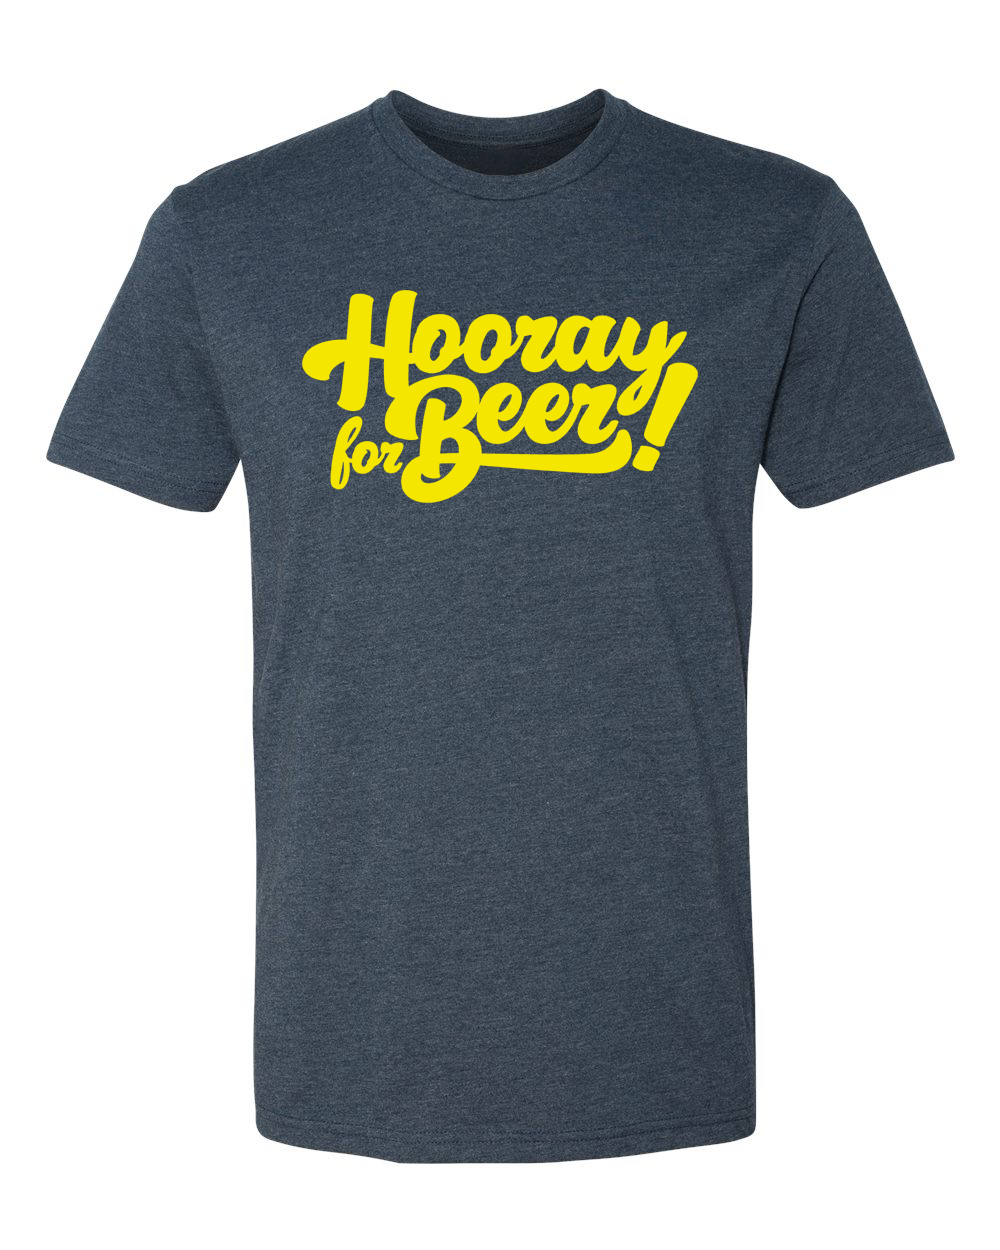 Bowling for Soup said it perfectly -  Hooray for beer! I'm really glad you're here Let's make this moment last You feel so right Wanna be with you all night Shout it out Hooray for beer!     All beer shirts are hand printed in Canada, in small batches to ensure the highest quality.